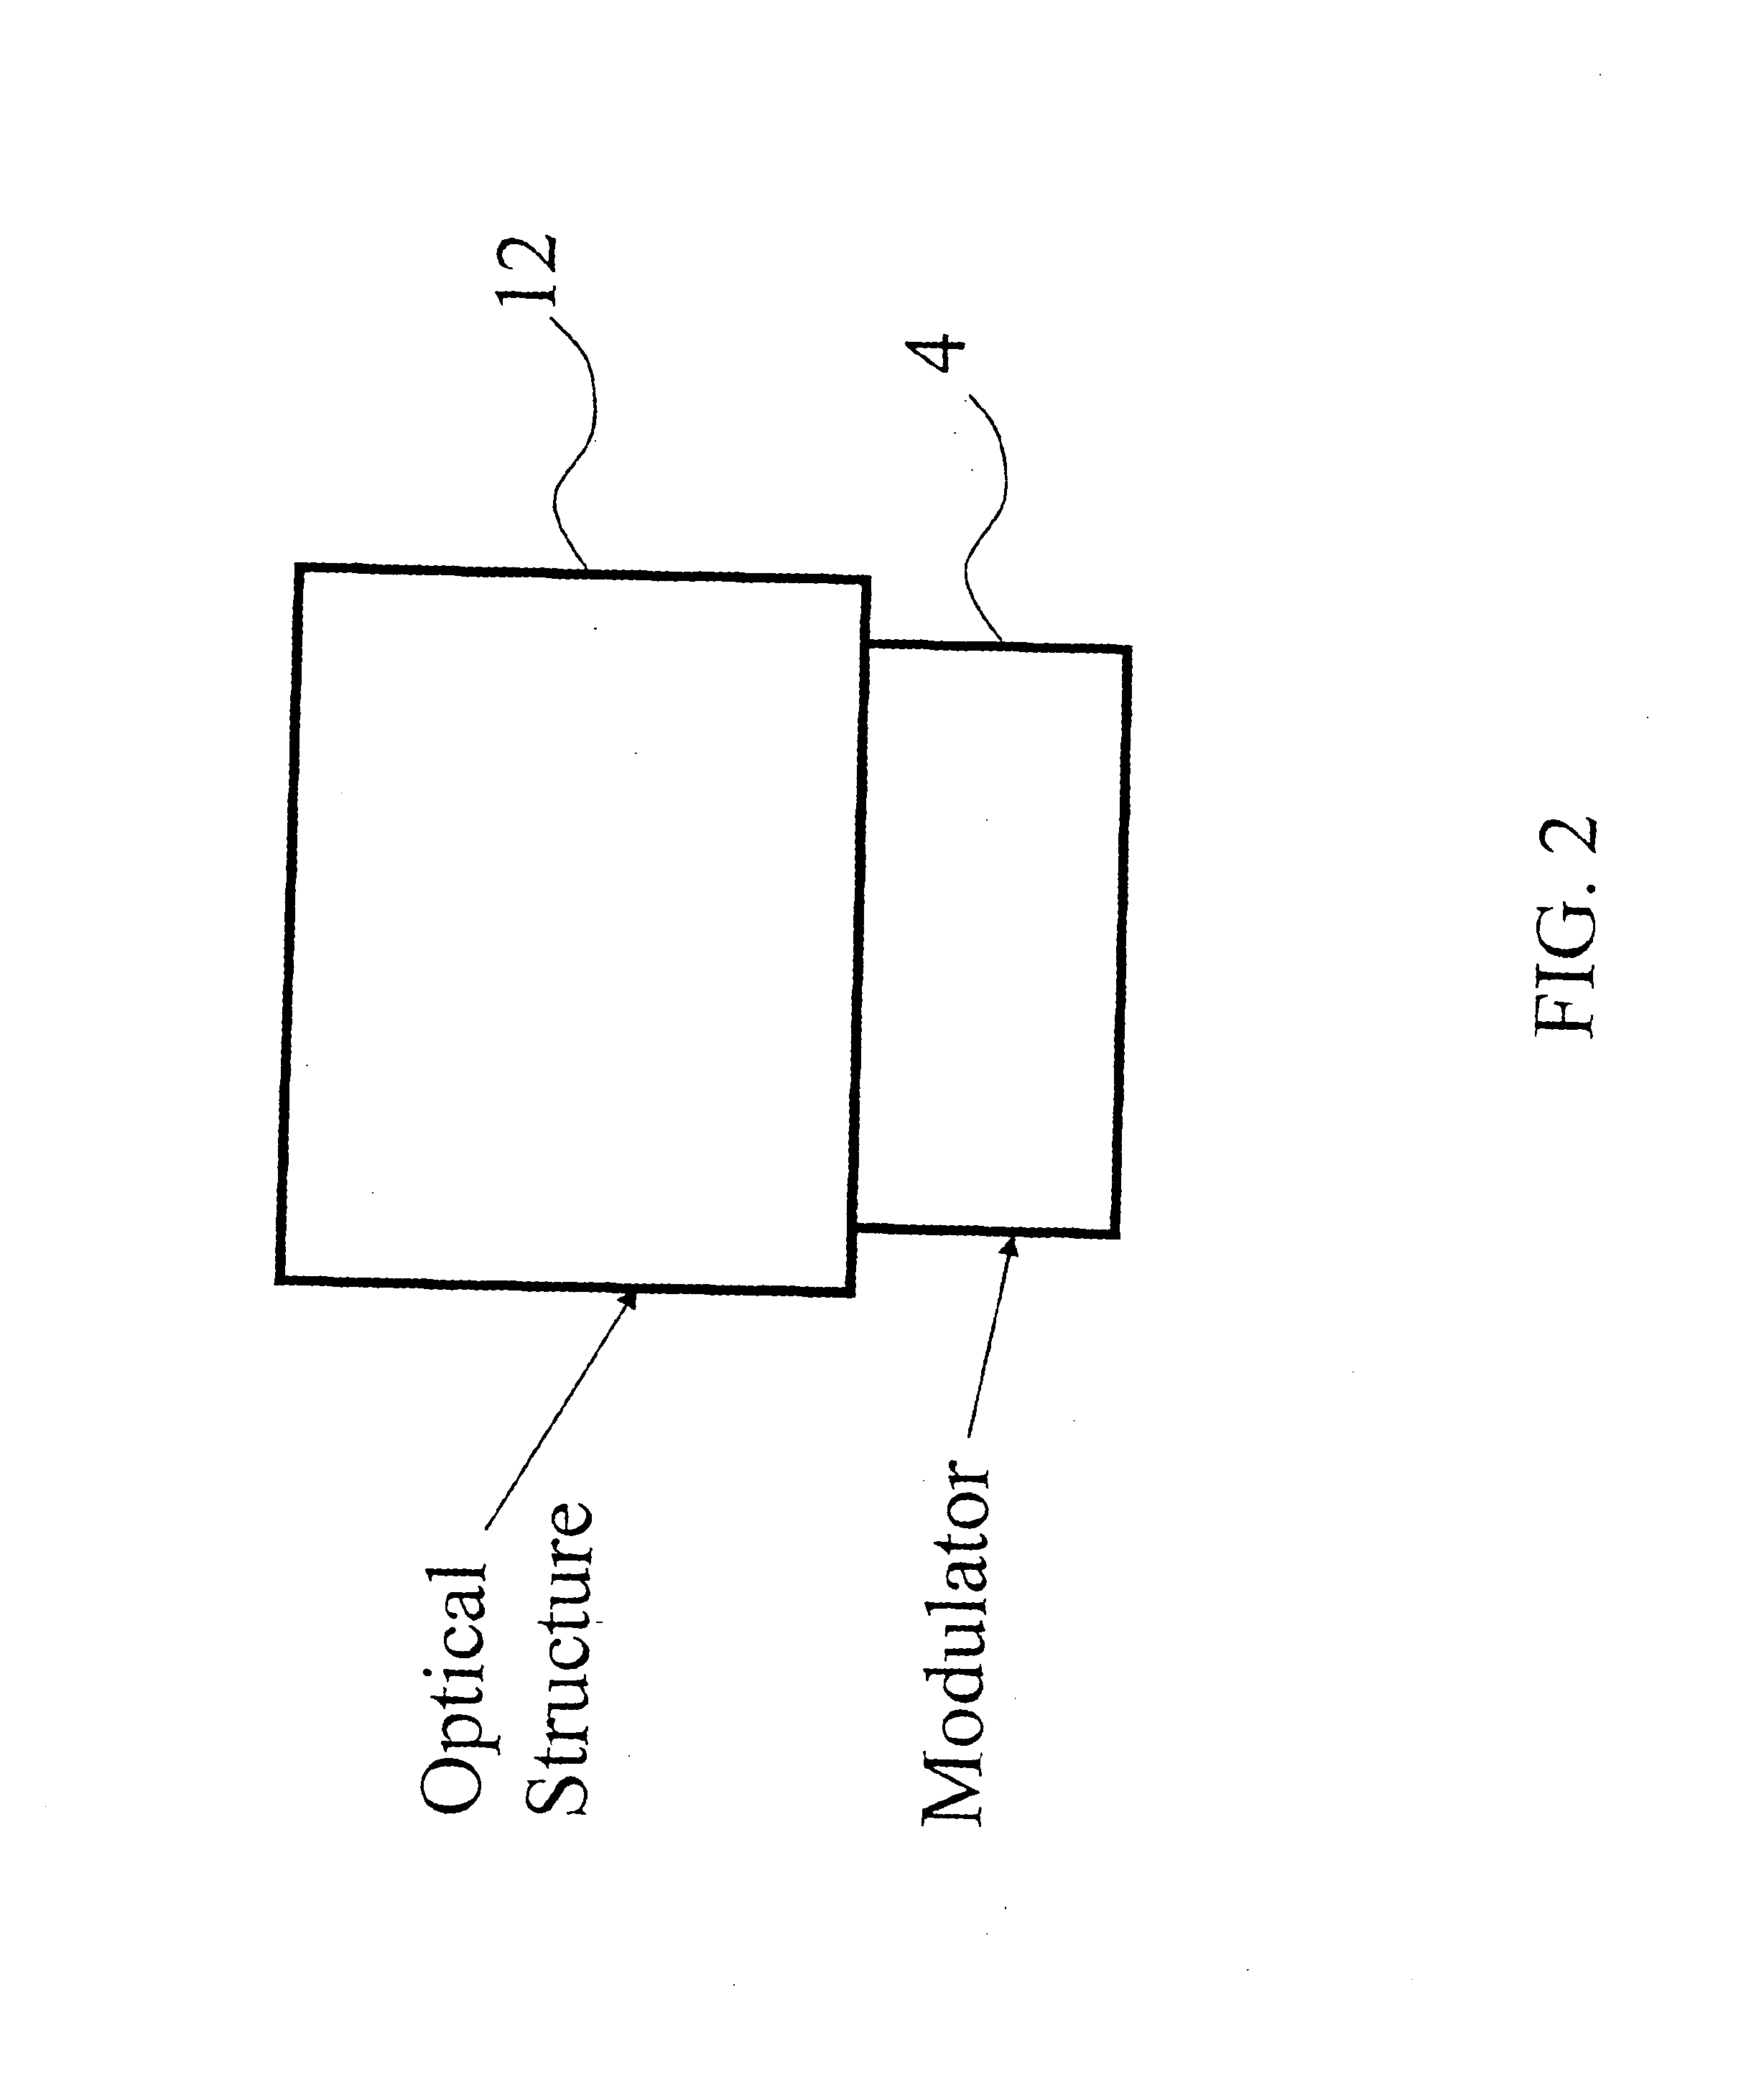 Method for illuminating an object with light from a laser light source